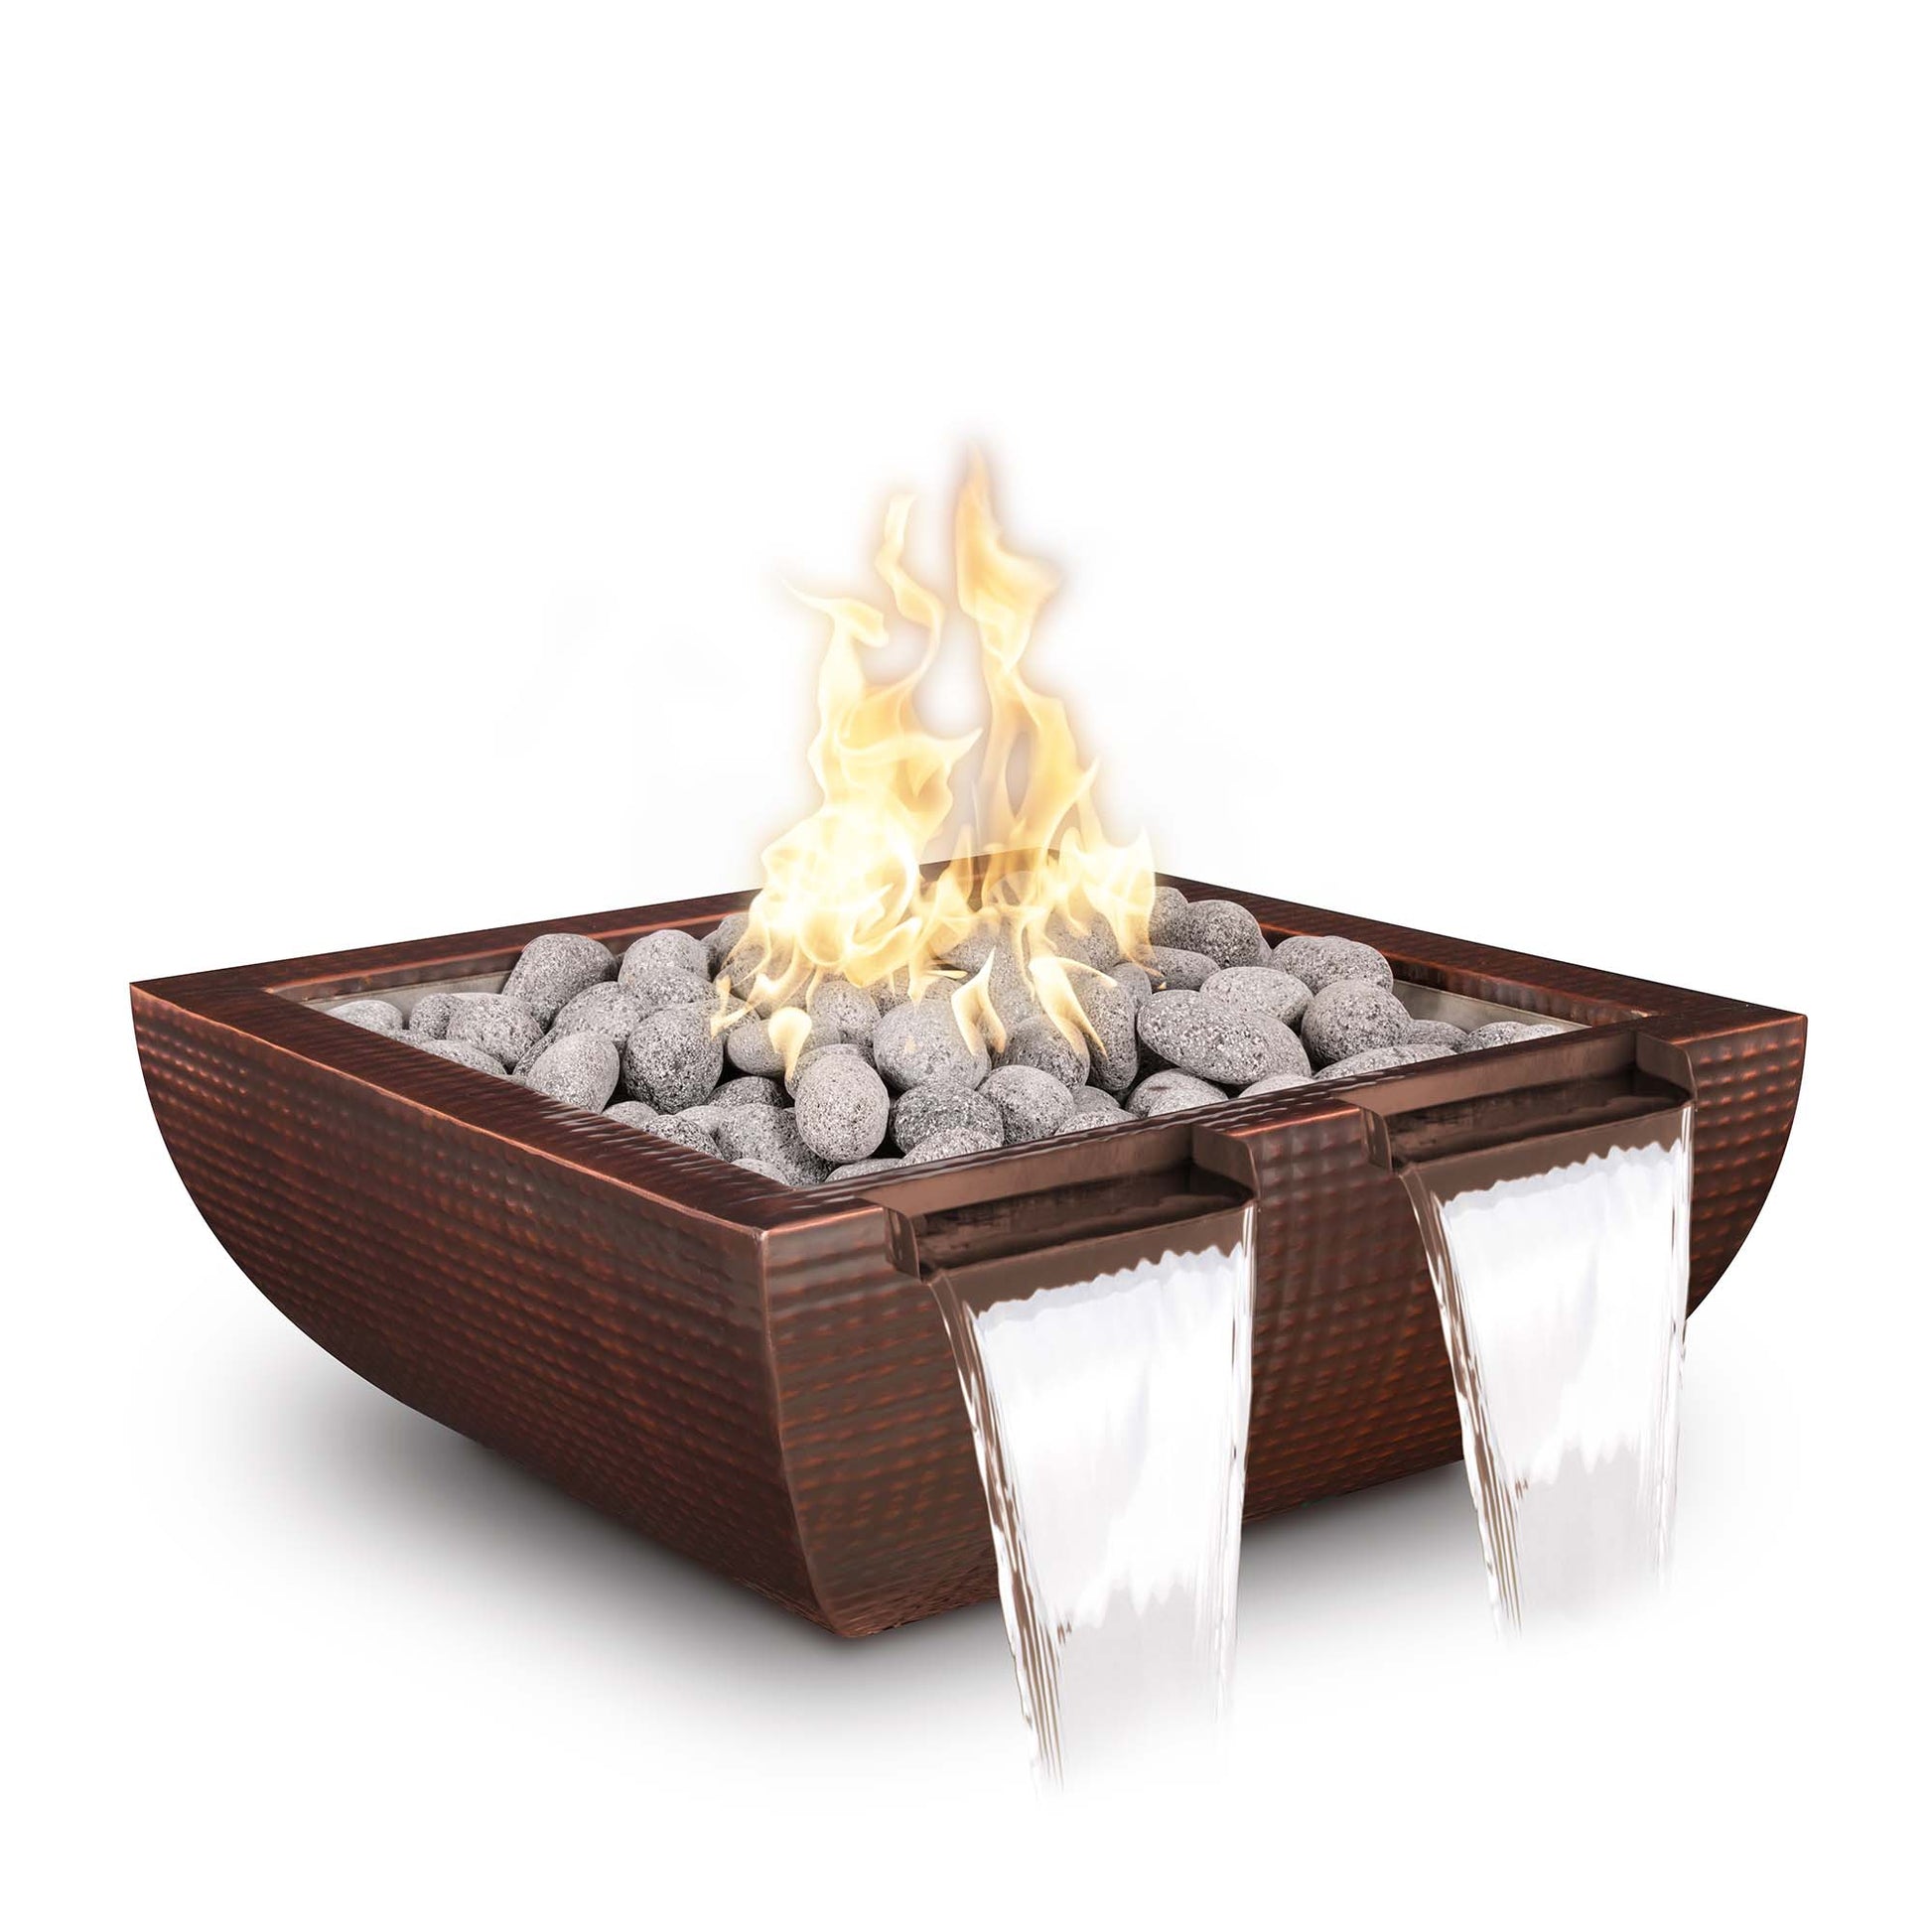 The Outdoor Plus Avalon Twin Spill 36" Pewter Powder Coated Metal Natural Gas Fire & Water Bowl with Match Lit Ignition